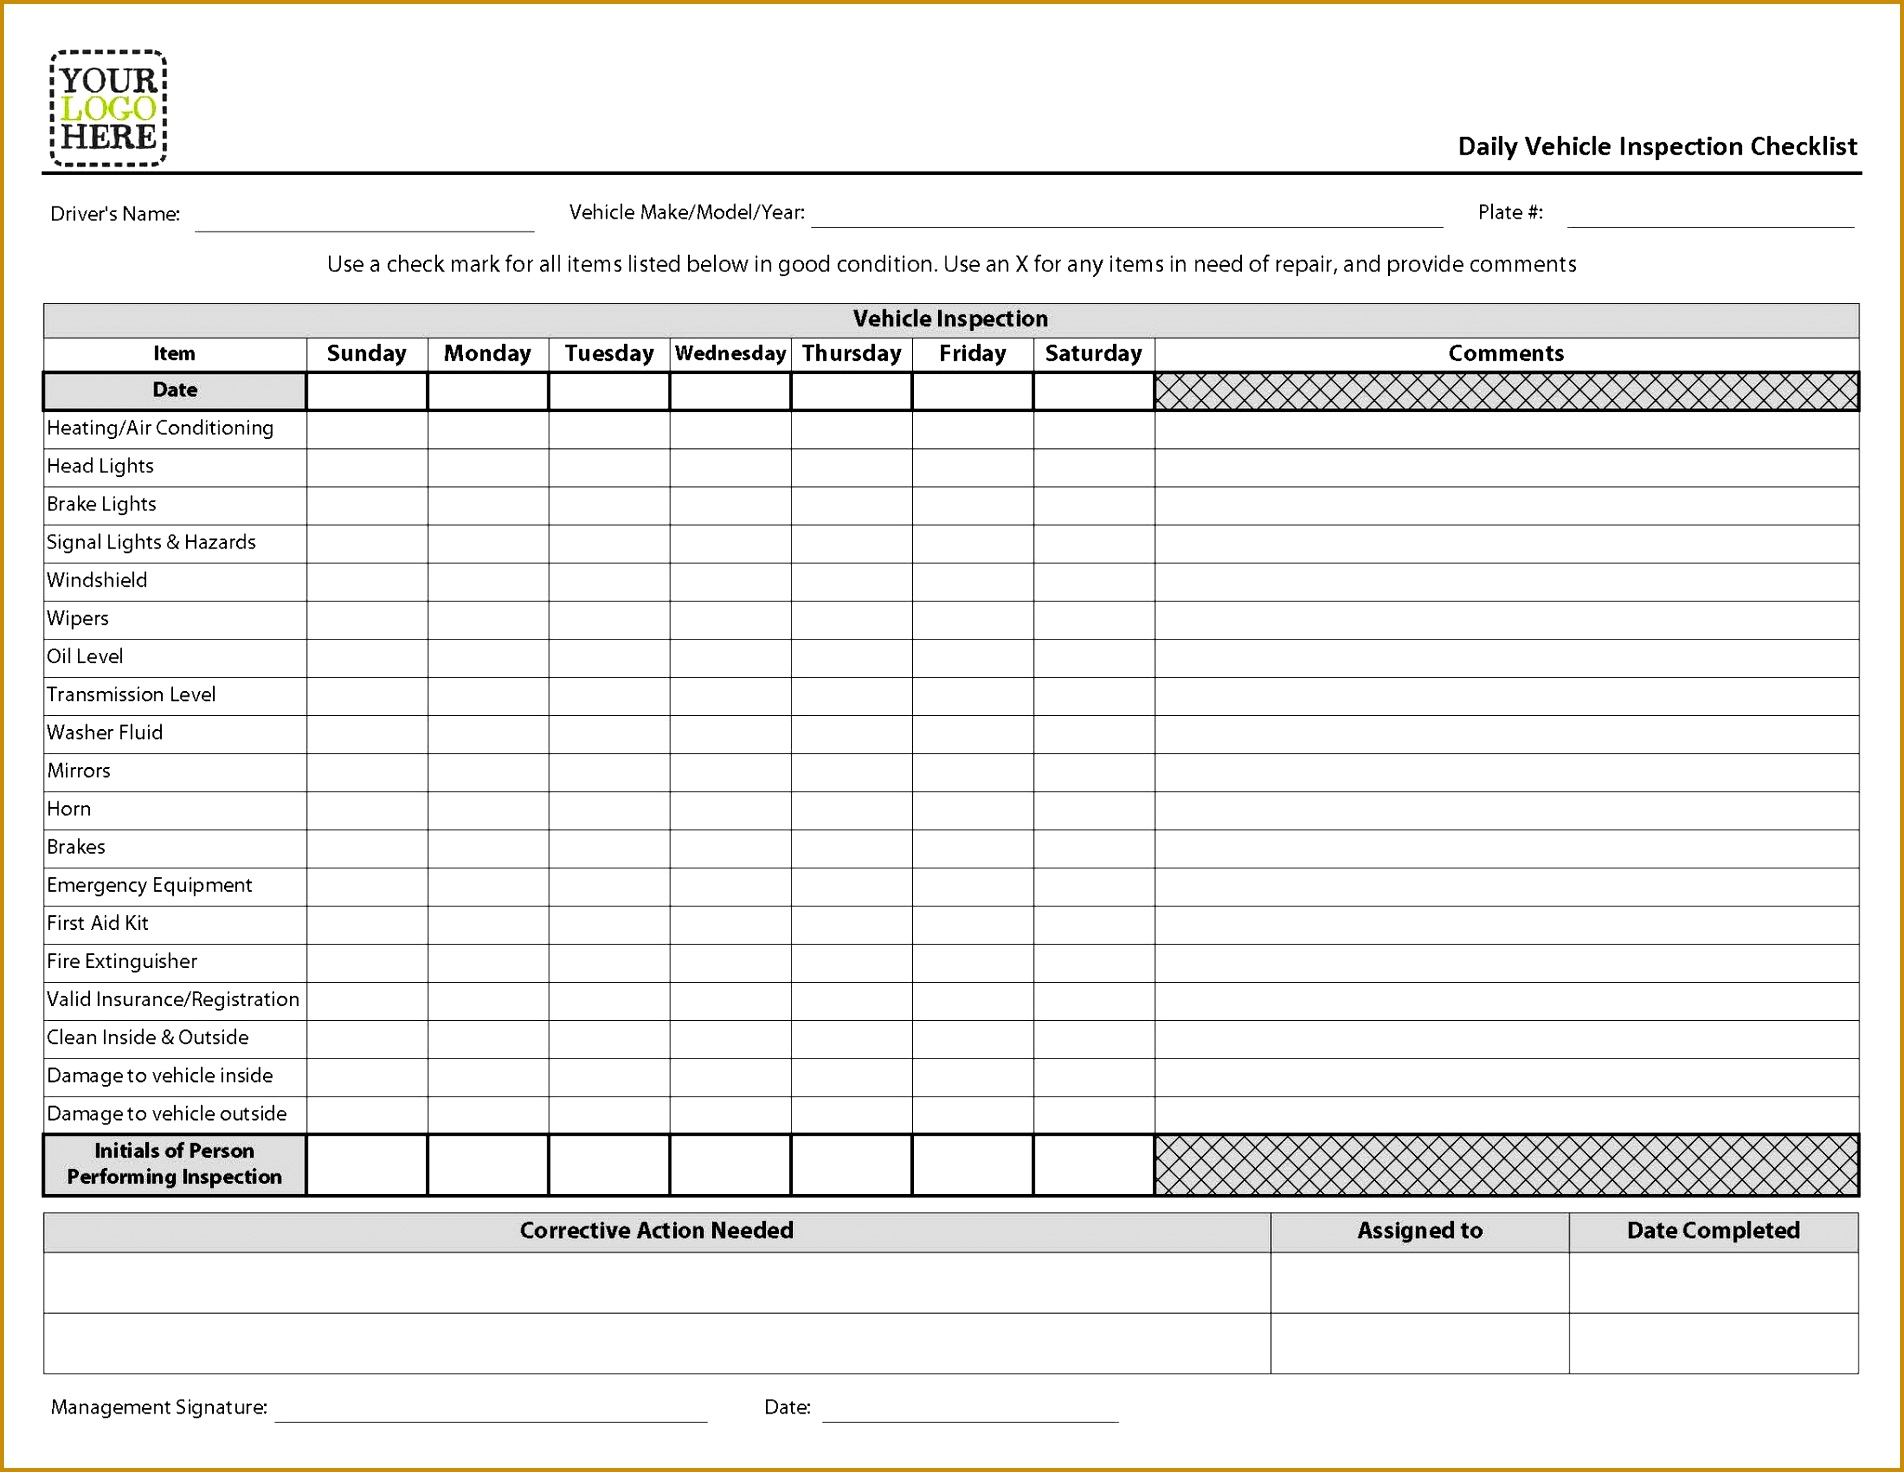 NCR Daily Vehicle Inspection Checklist Form 19041472